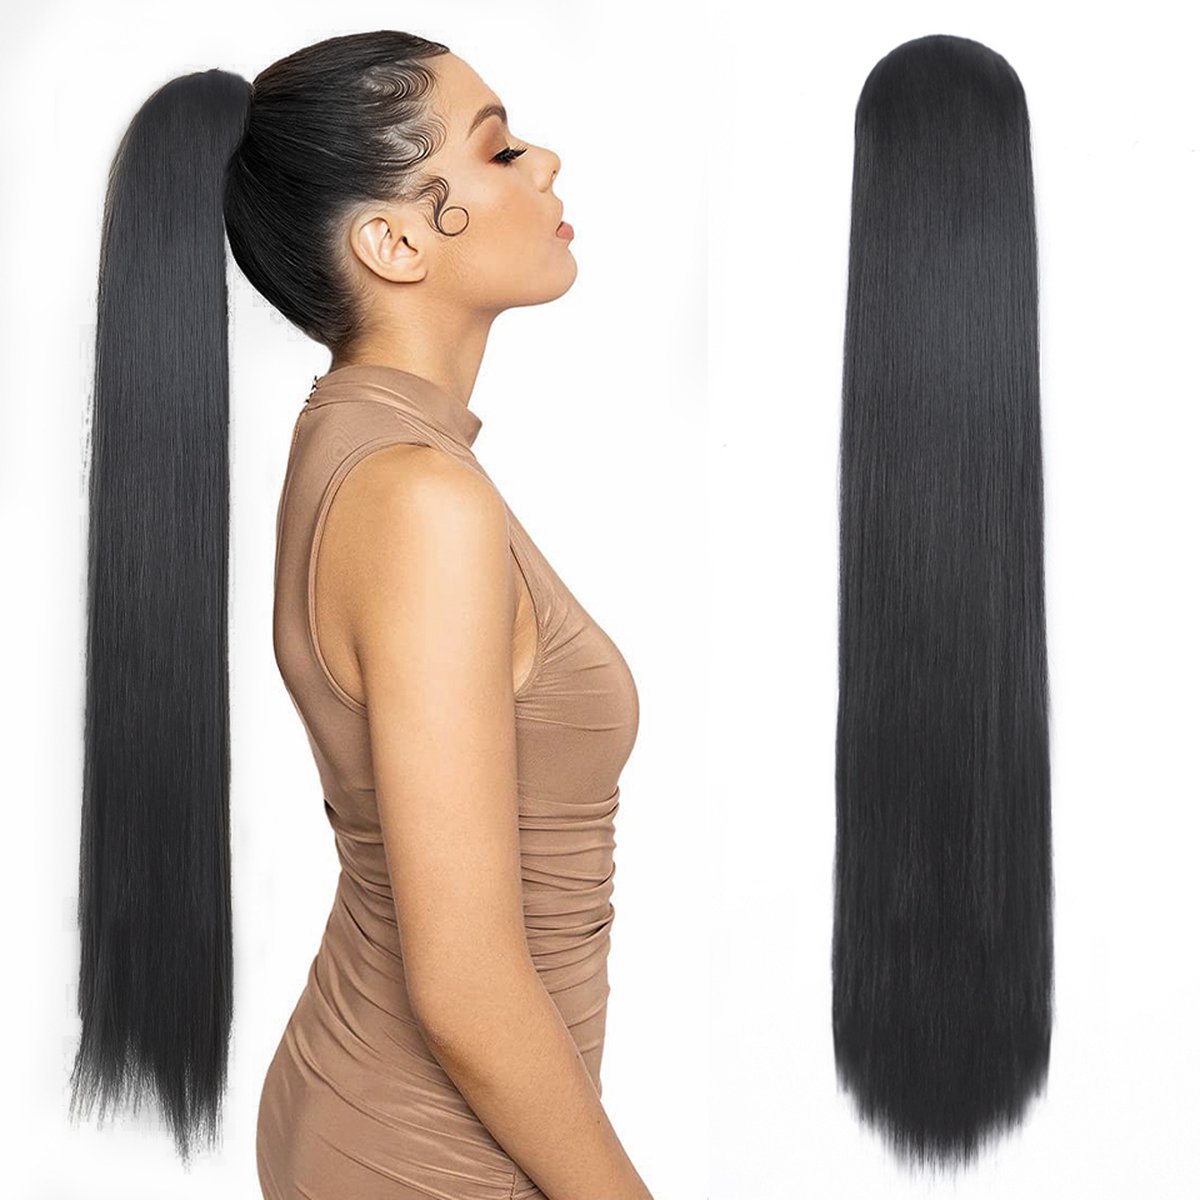 Miss Ponytails - Straight ponytail extentions - 26 inch - Zwart 1B - Hair extentions - Haarverlenging